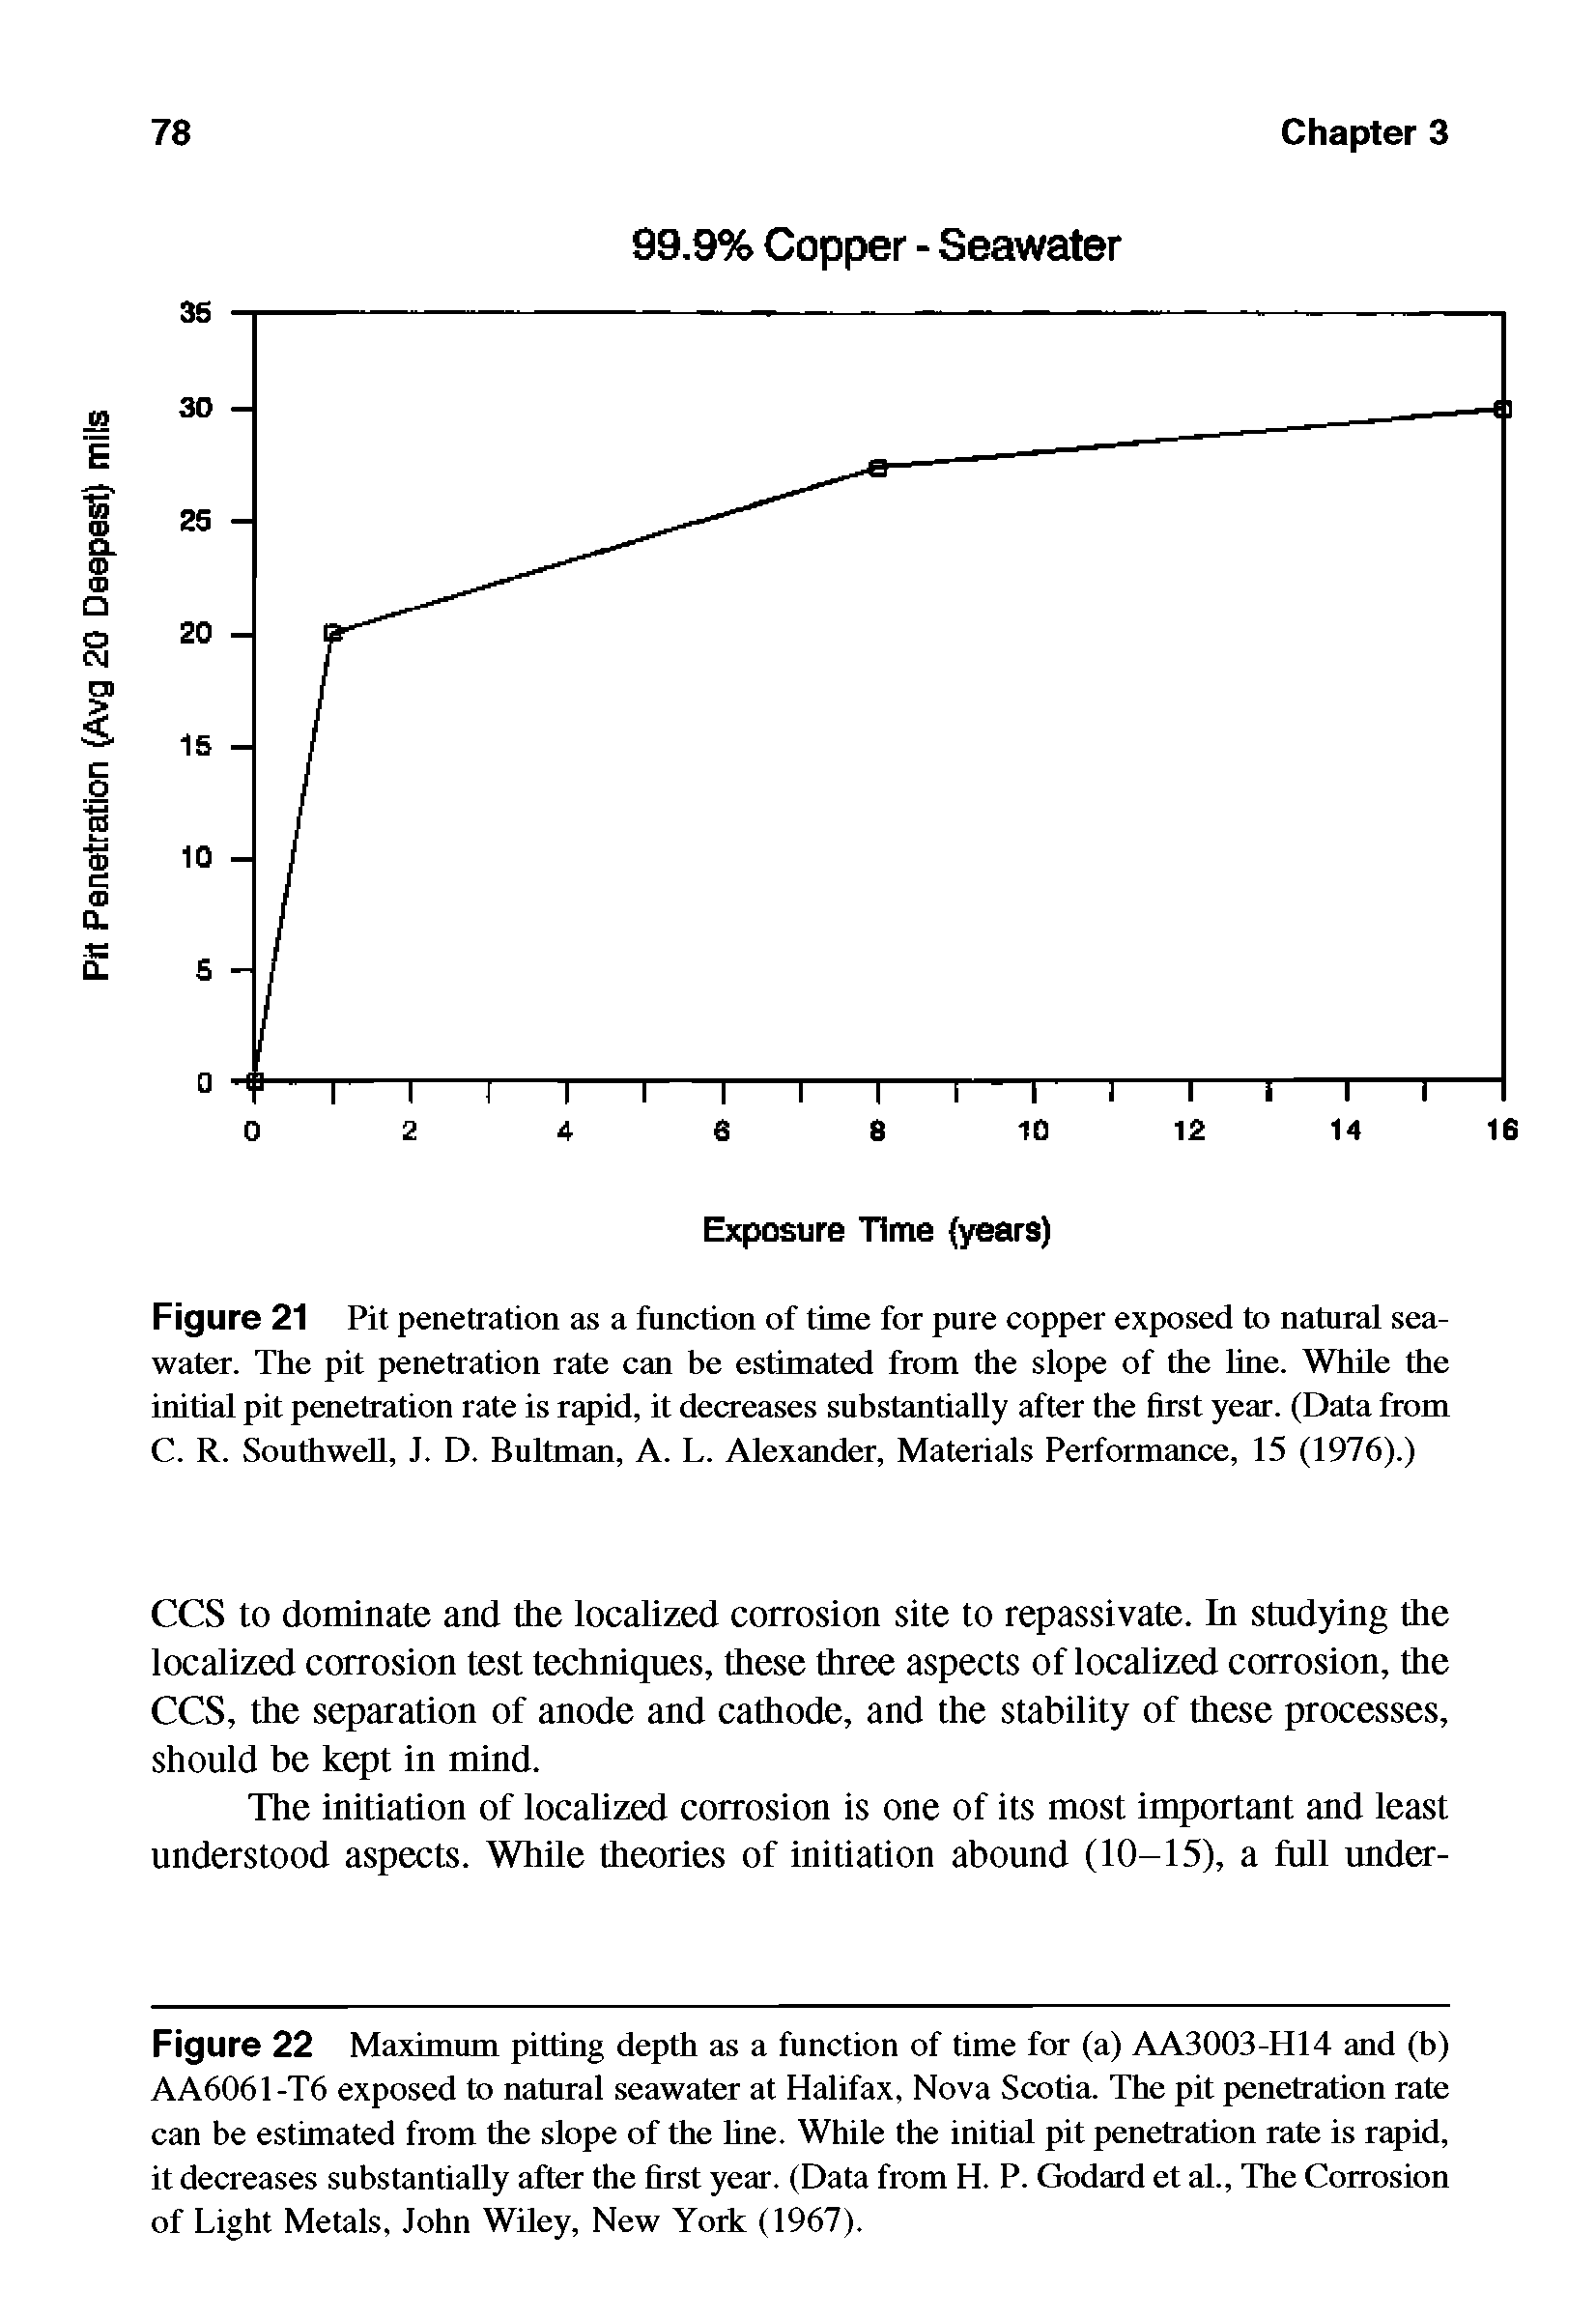 Figure 22 Maximum pitting depth as a function of time for (a) AA3003-H14 and (b) AA6061-T6 exposed to natural seawater at Halifax, Nova Scotia. The pit penetration rate can be estimated from the slope of the line. While the initial pit penetration rate is rapid, it decreases substantially after the first year. (Data from H. P. Godard et al., The Corrosion of Light Metals, John Wiley, New York (1967).